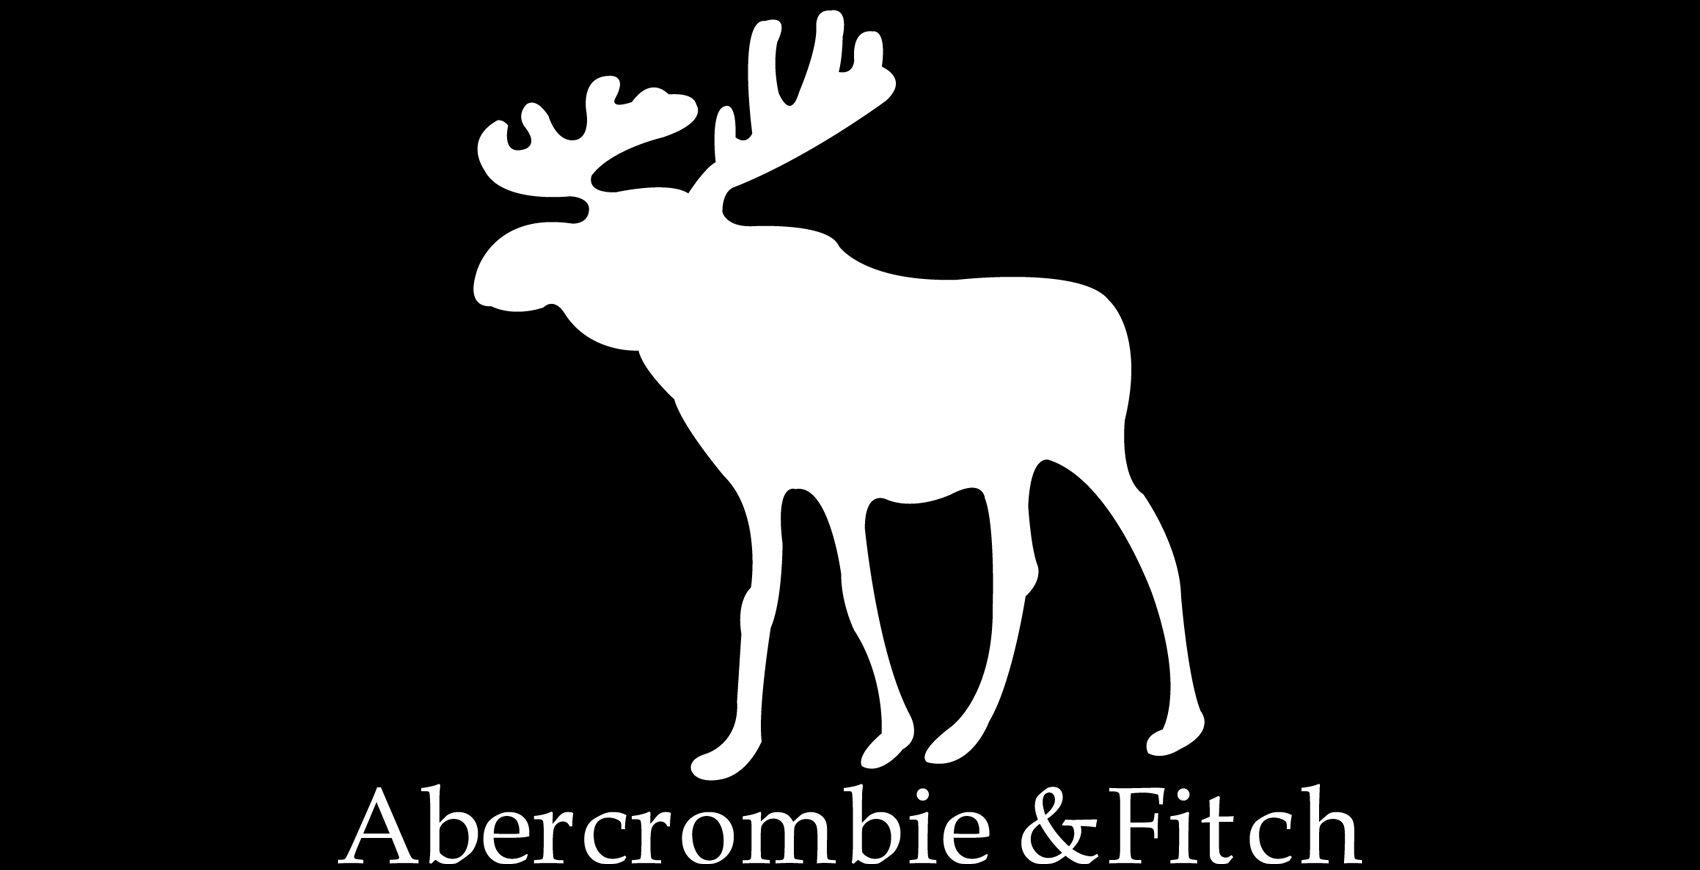 Abercrombie Moose Logo - Abercrombie and Fitch Logo, Abercrombie and Fitch Symbol Meaning